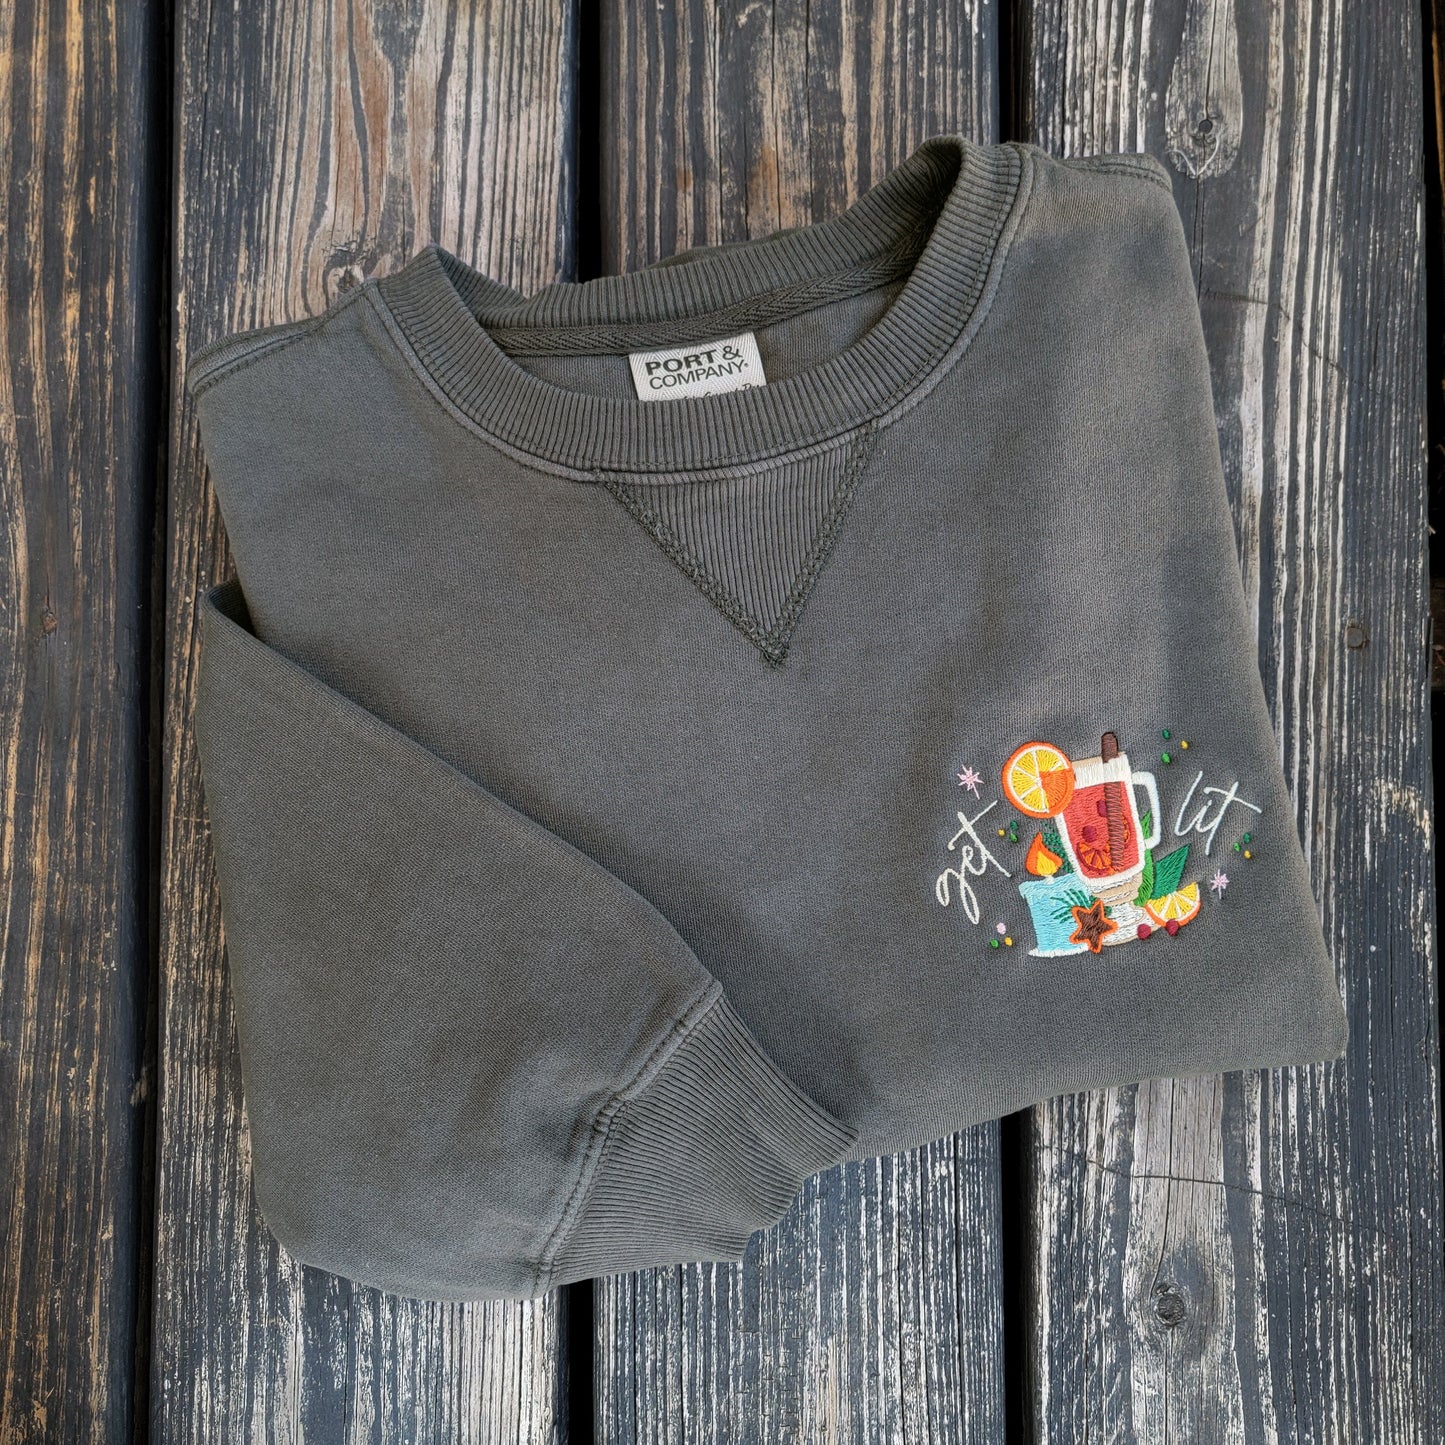 Cider, Spice, & All Things Nice - Embroidered Crewneck